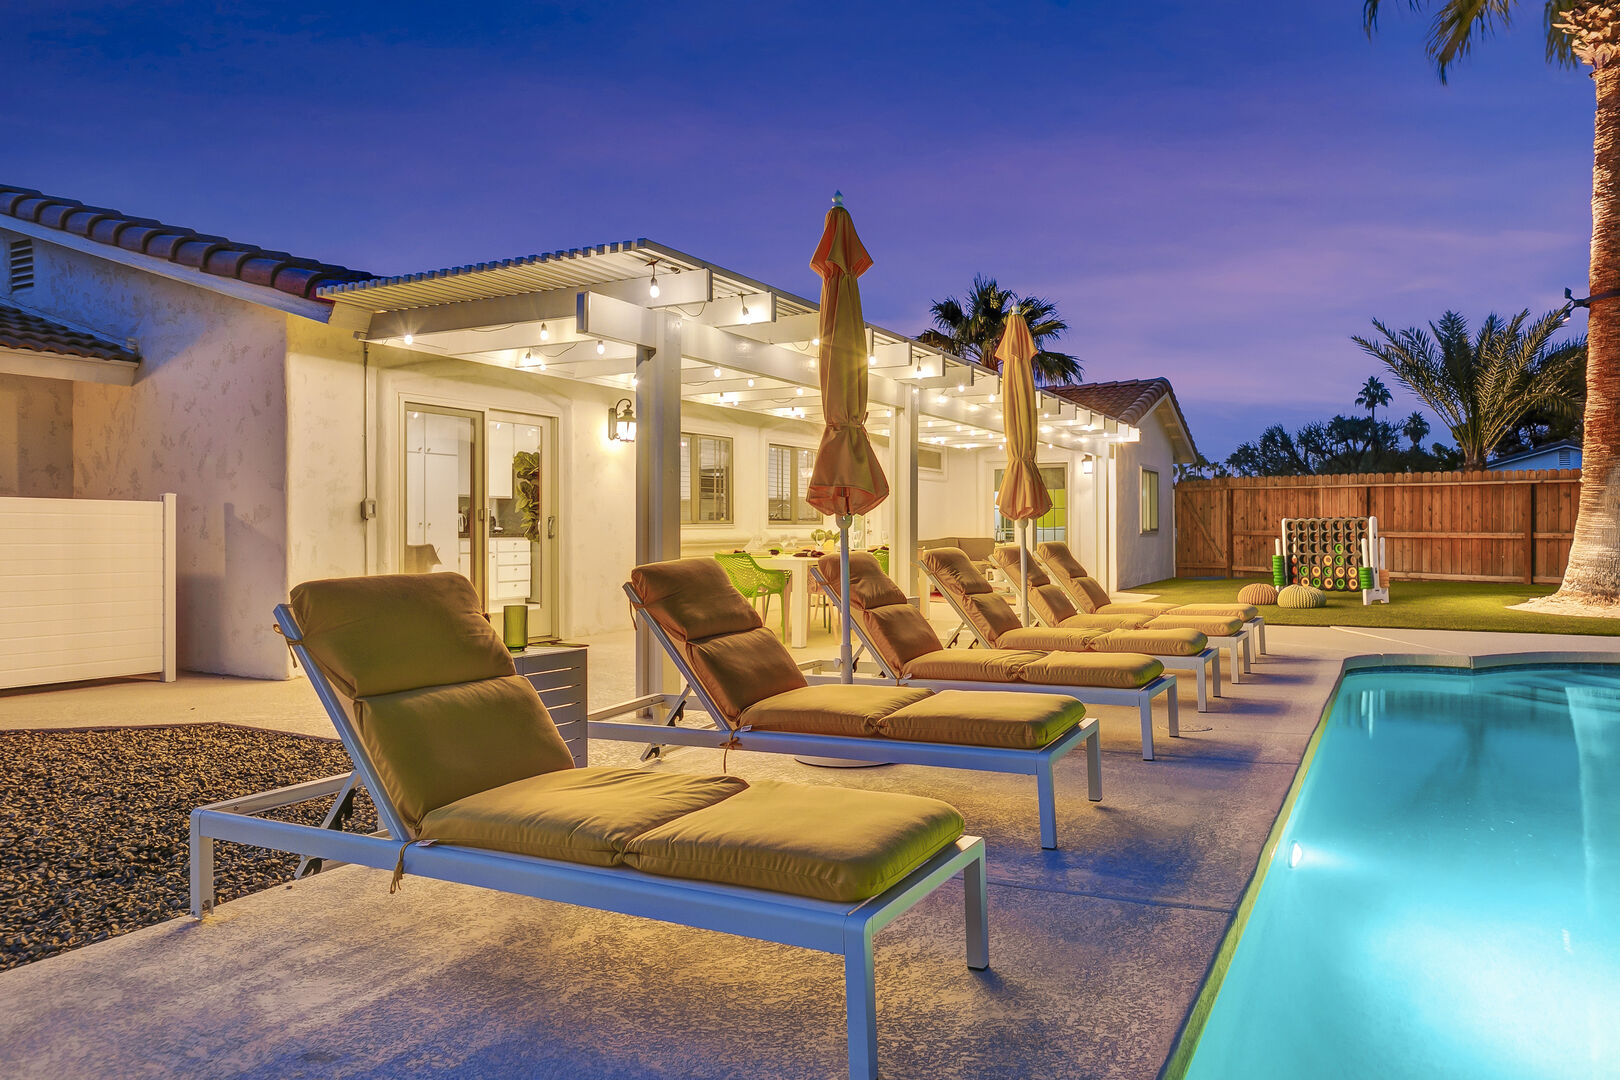 Take a dip in the pool or enjoy lounging on the sidelines from one of the six loungers which include comfy cushions.